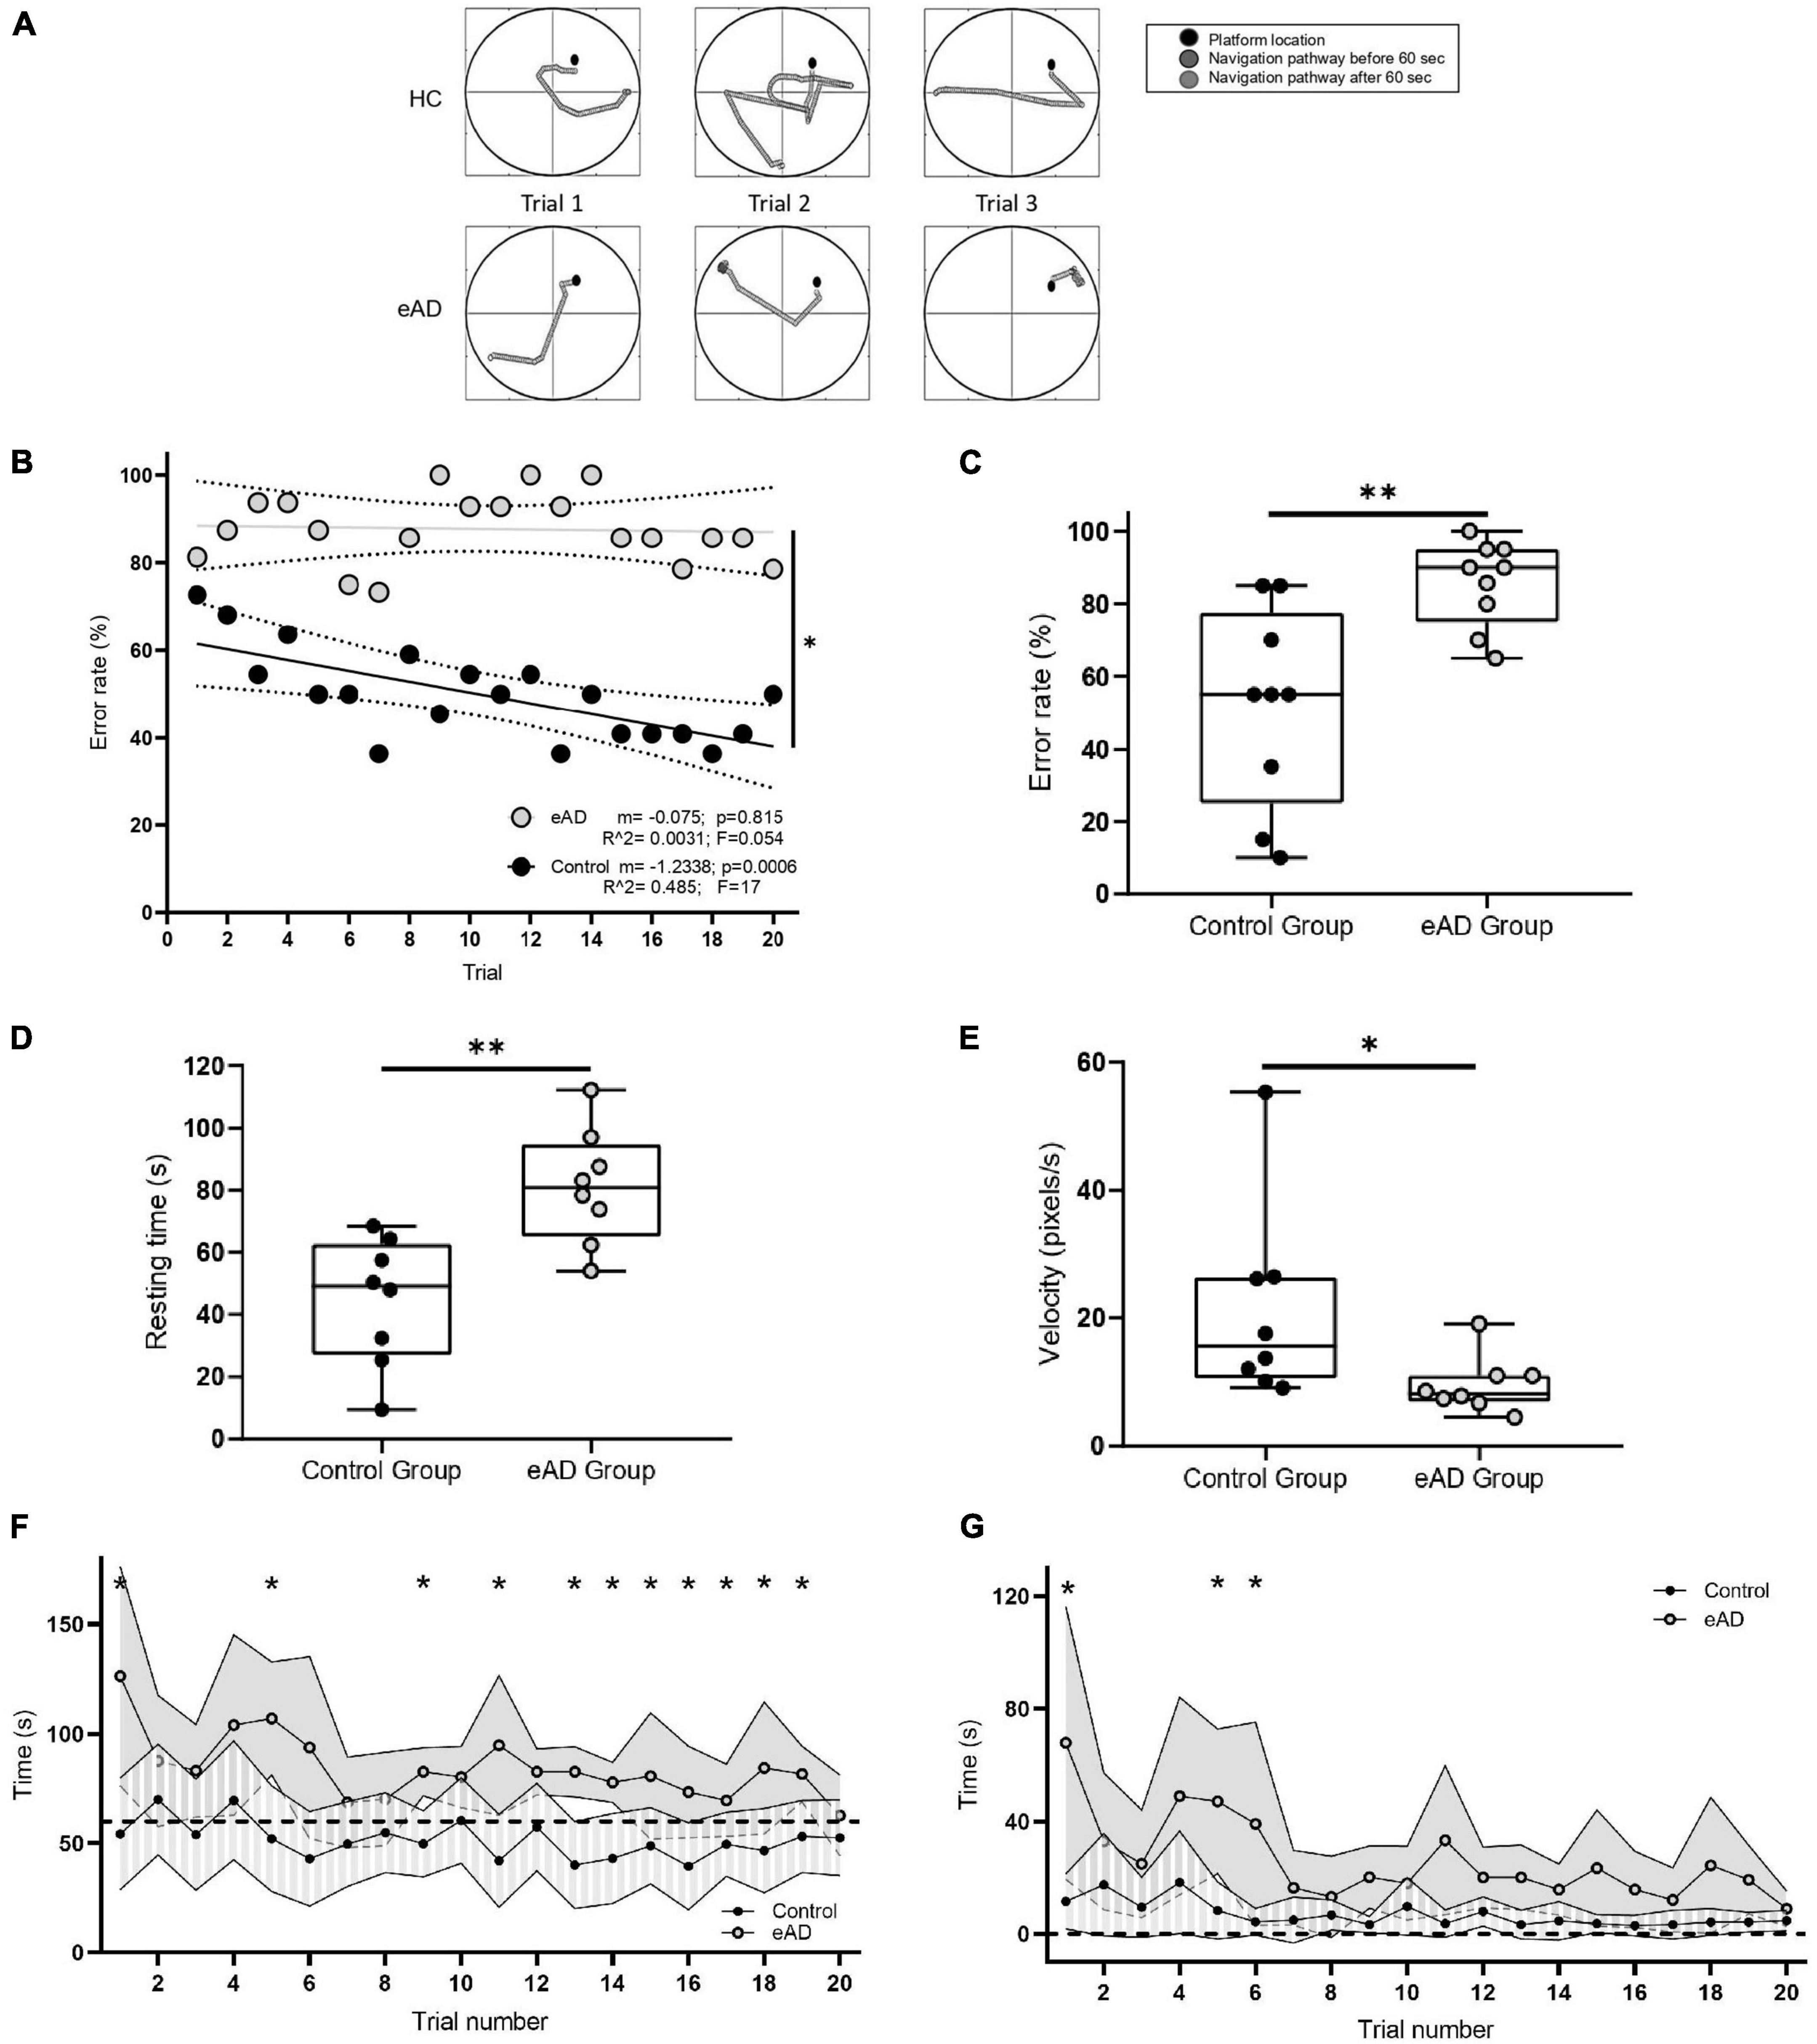 Visual-spatial processing impairment in the occipital-frontal connectivity network at early stages of Alzheimer’s disease